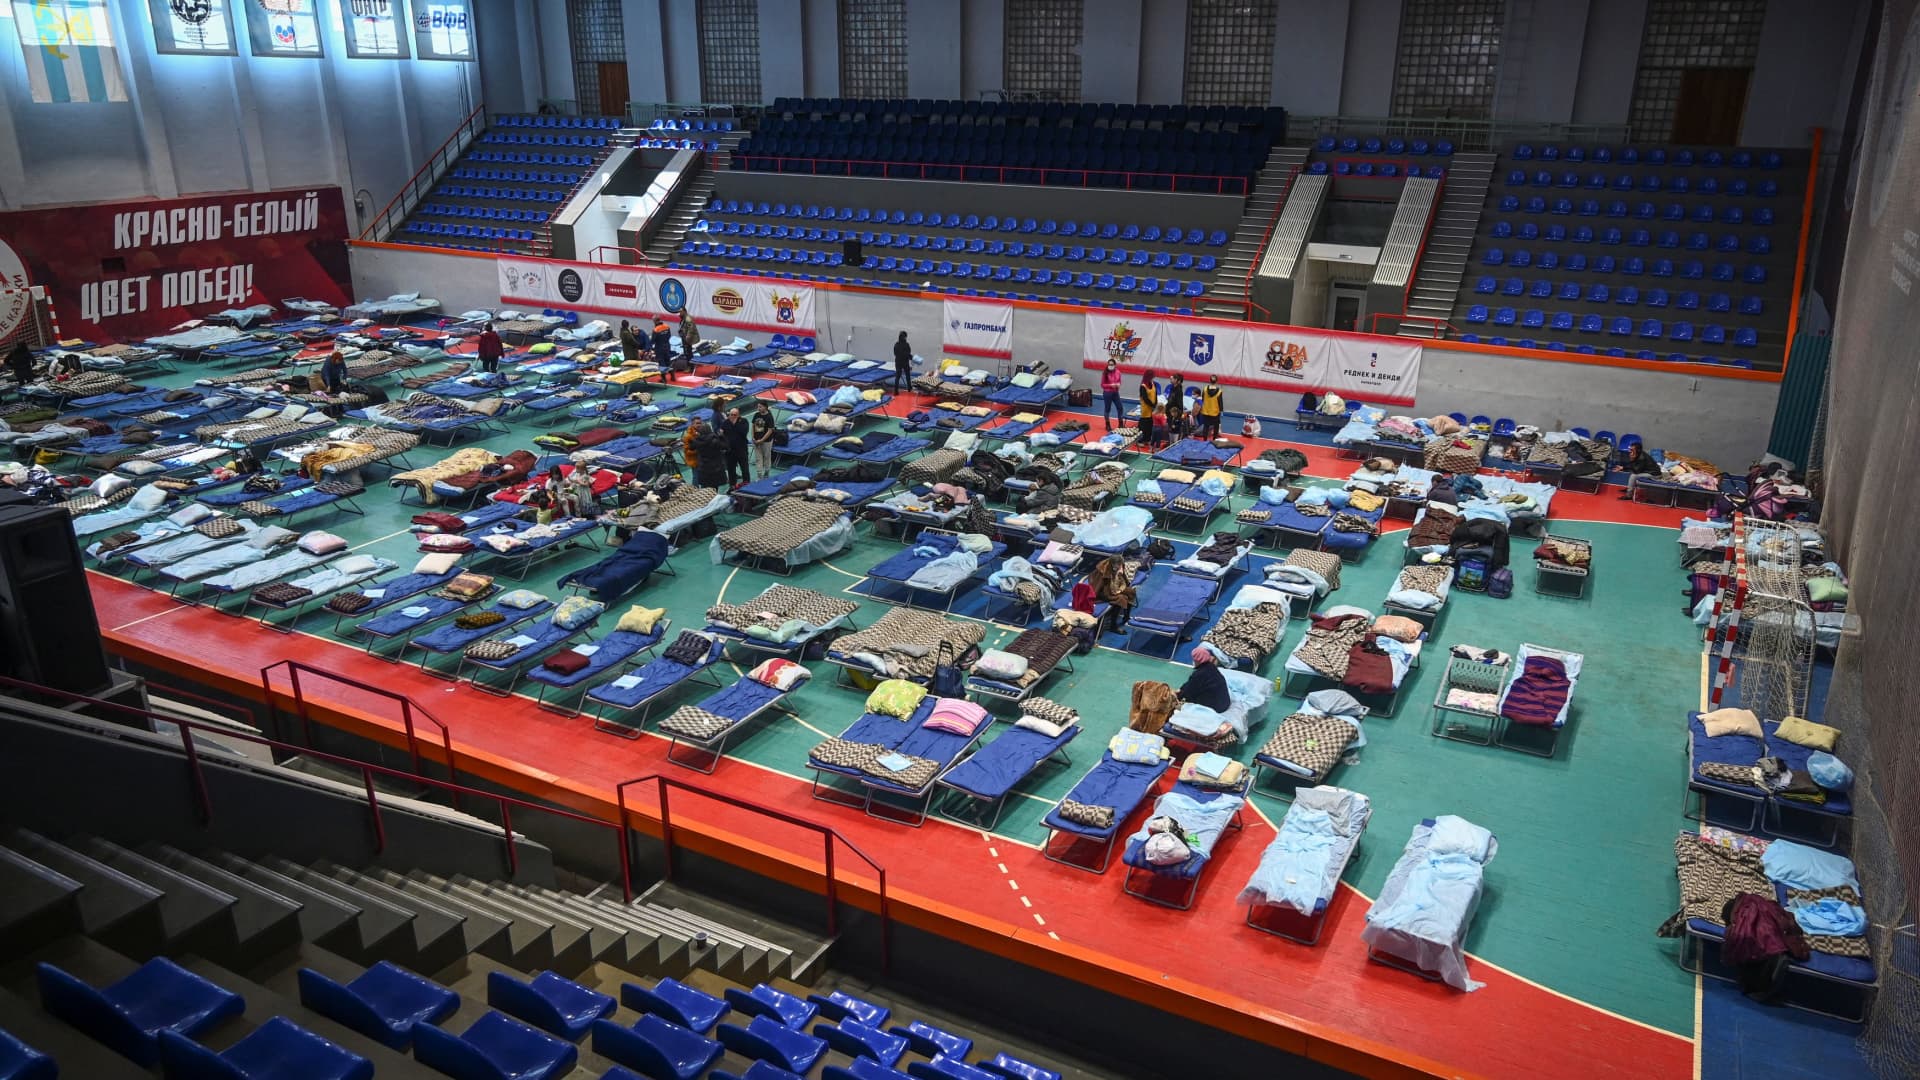 Residents of the Ukrainian city of Mariupol stay at a temporary accommodation centre for evacuees located in the building of a local sports school in Taganrog in the Rostov region, Russia March 23, 2022.